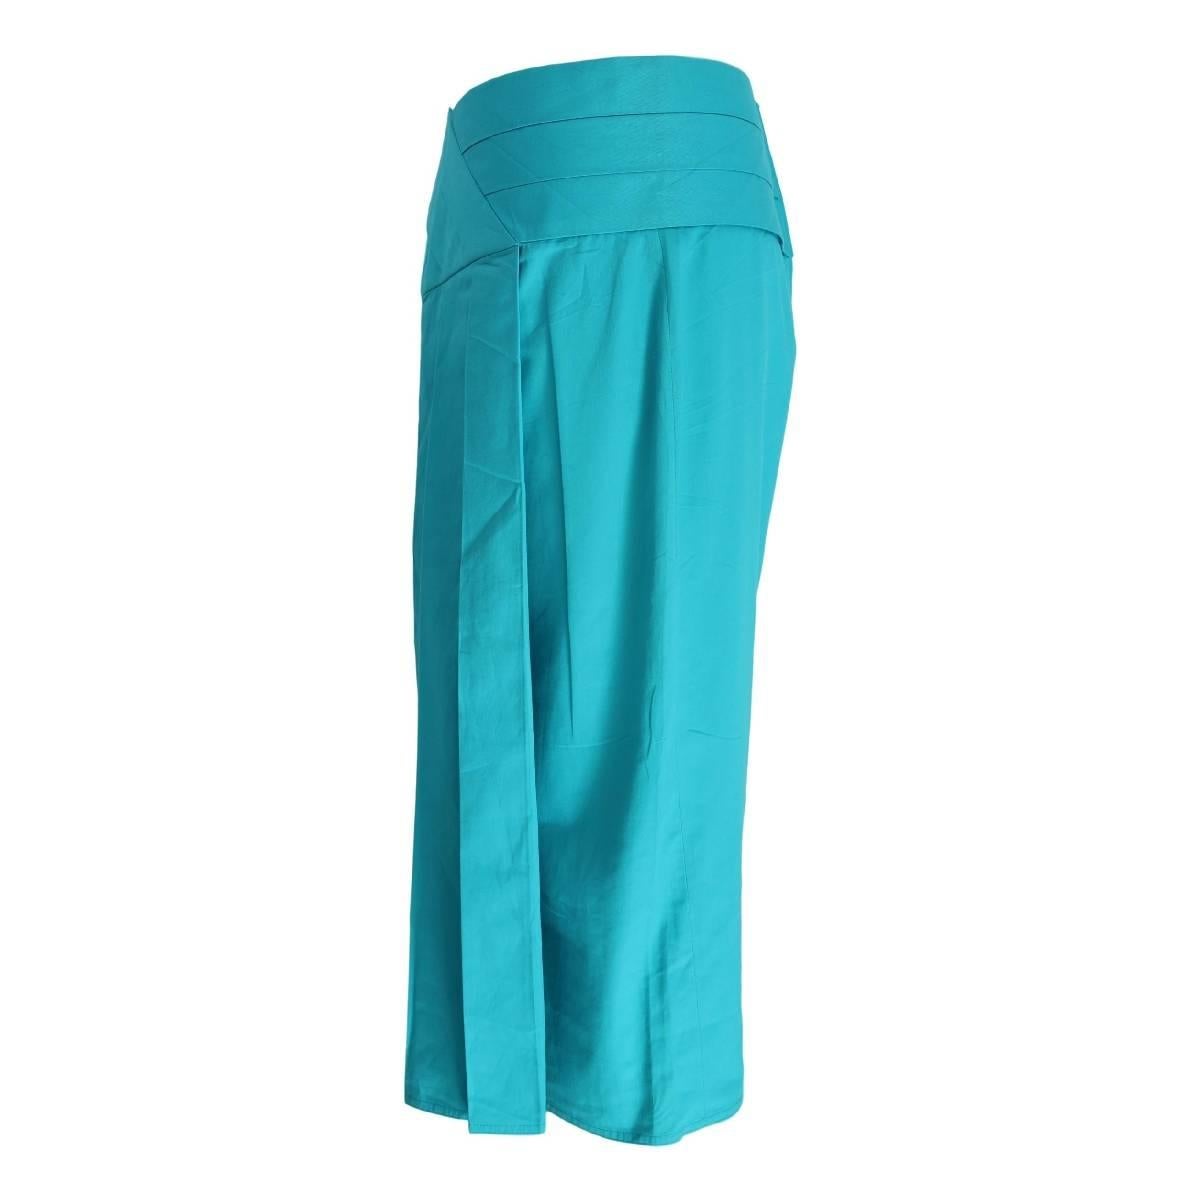 Alberta Ferretti long skirt knee light blue, 100% cotton, the skirt has creases on the front.

Size: 46 It 42 F / D 14 GB 12 US

Waist: 39 cm
Length: 79 cm

Color: light blue
Composition: 100% cotton
Conditions: excellent conditions